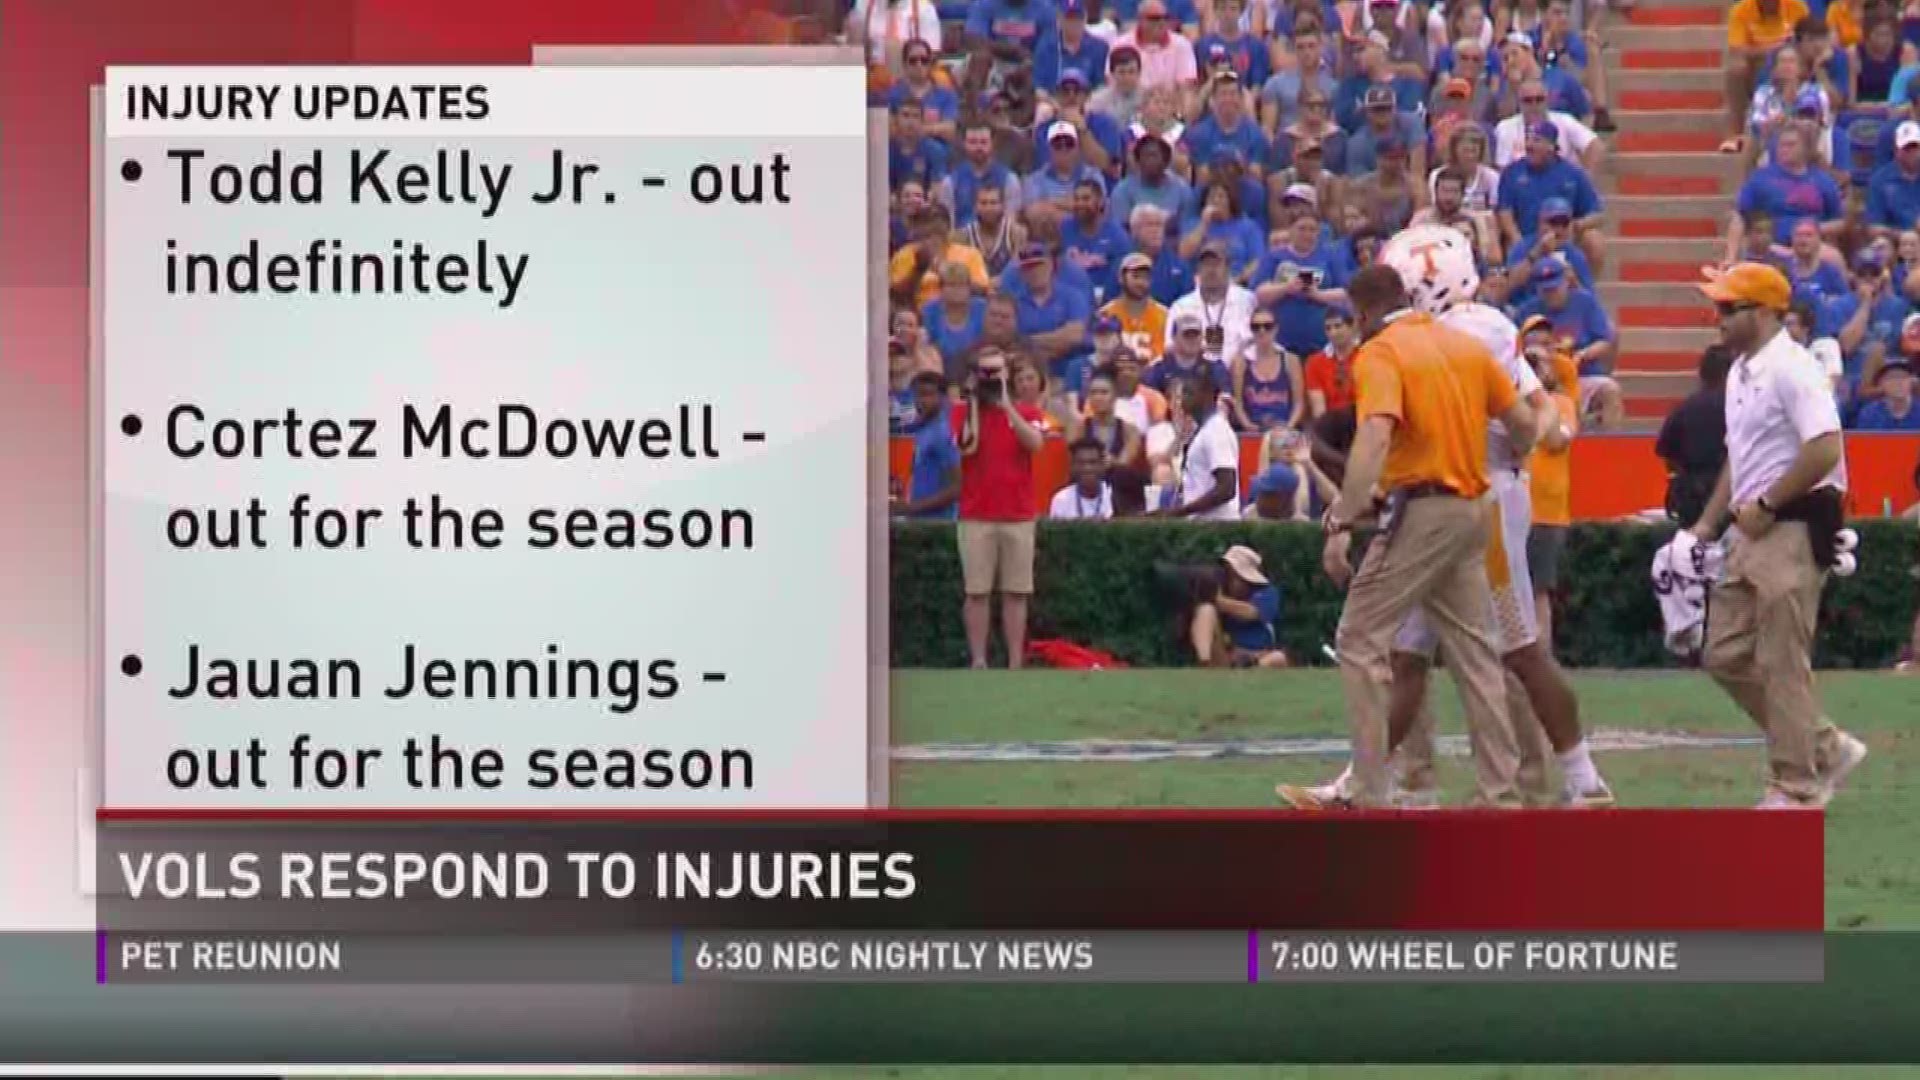 Todd Kelly Jr. is out indefinitely and Cortez McDowell will miss the rest of the season. That's four defensive starters out for the Vols.